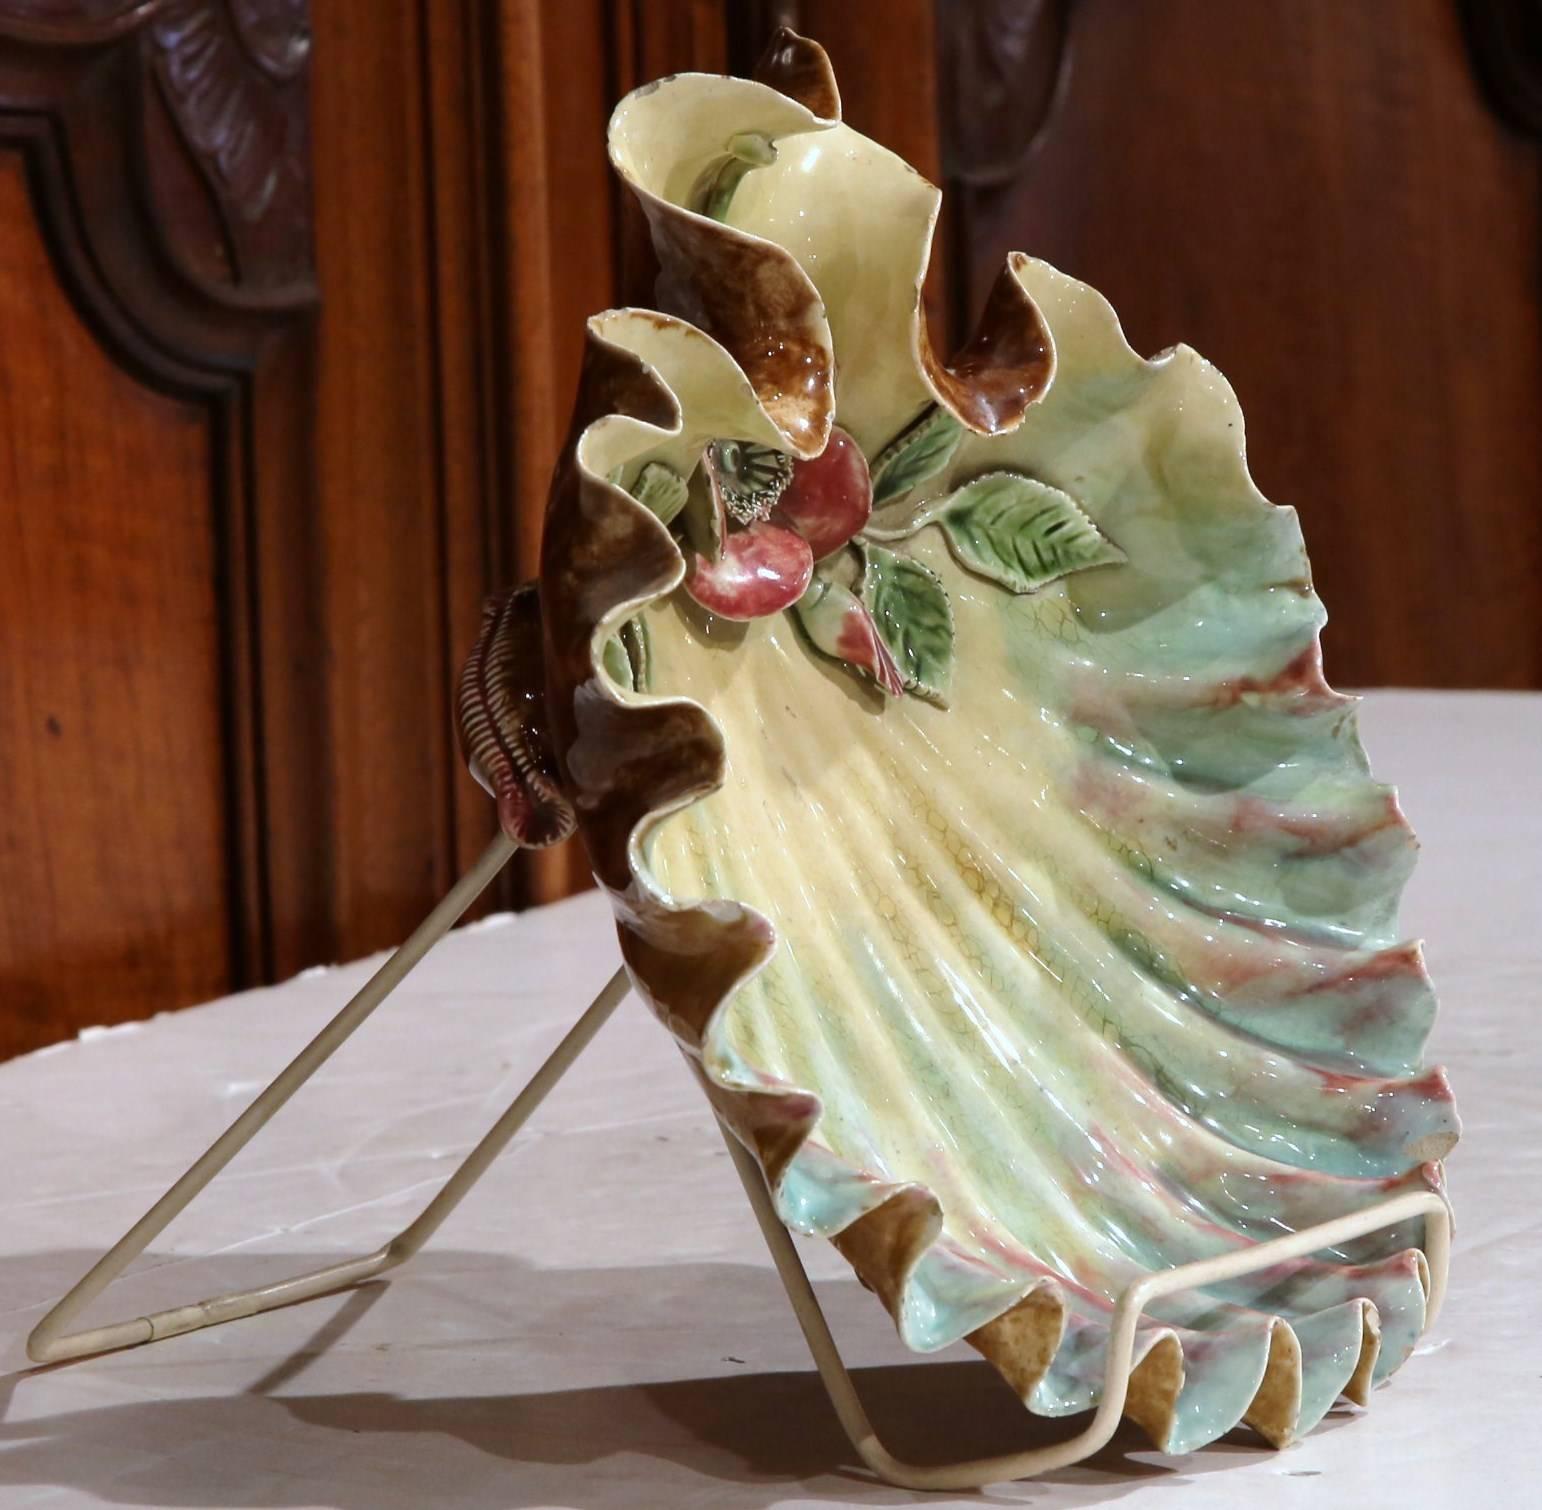 Large antique hand-painted Majolica shell platter from France, circa 1860. With beautiful shape with soft colors, this vide-poche or soap dish seats on three small feet shaped like shellfish. A true one of a kind in excellent condition!